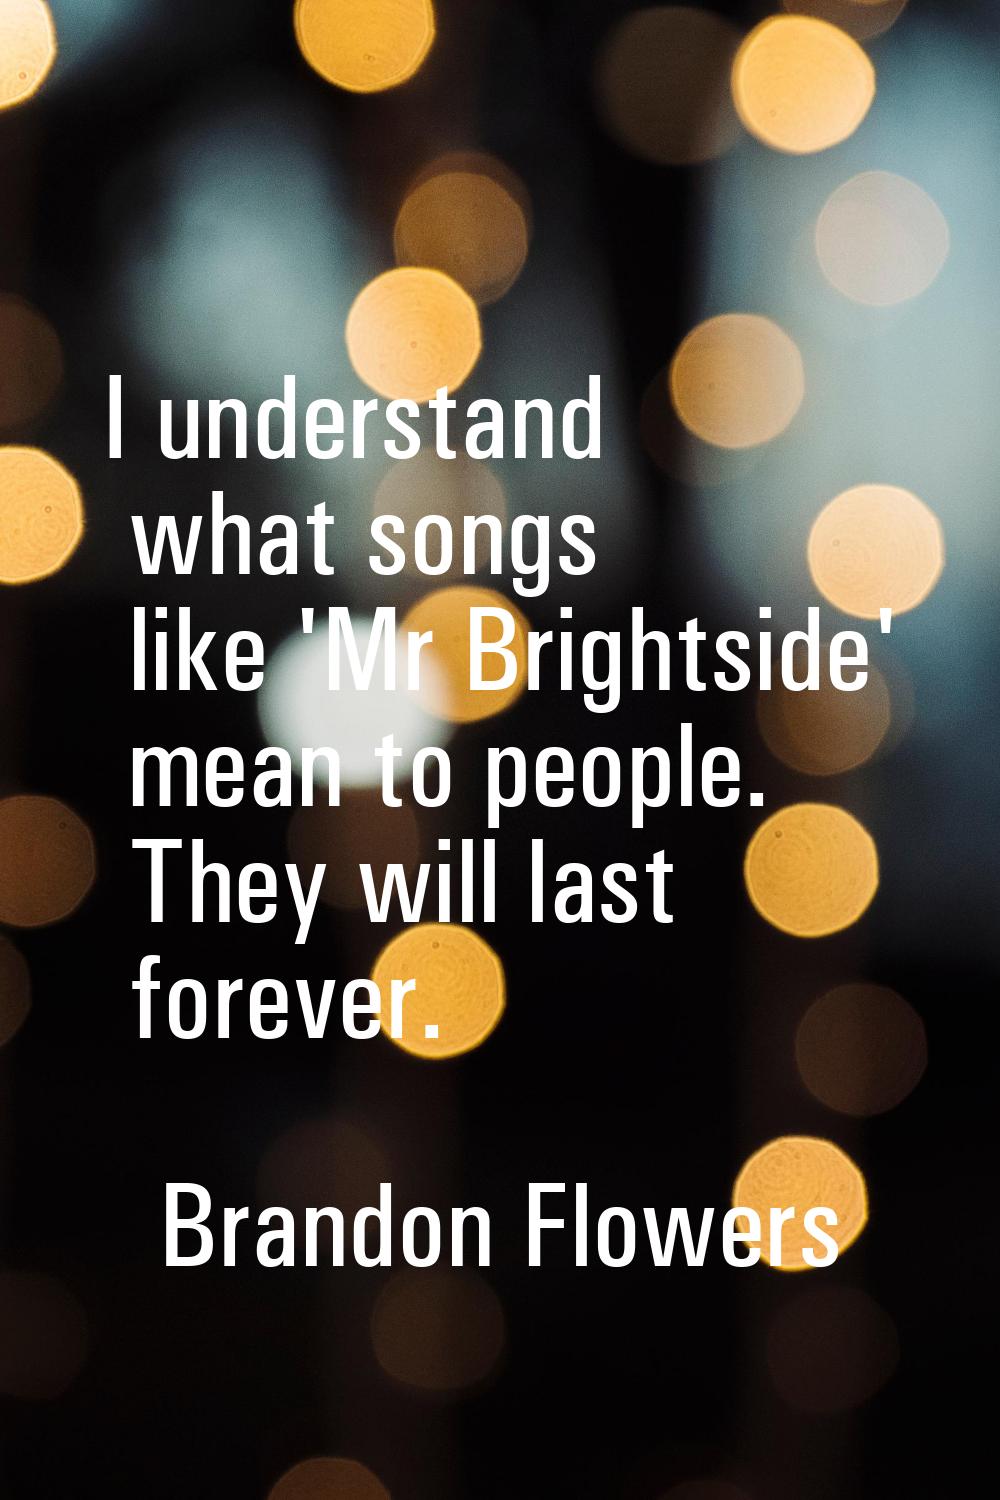 I understand what songs like 'Mr Brightside' mean to people. They will last forever.